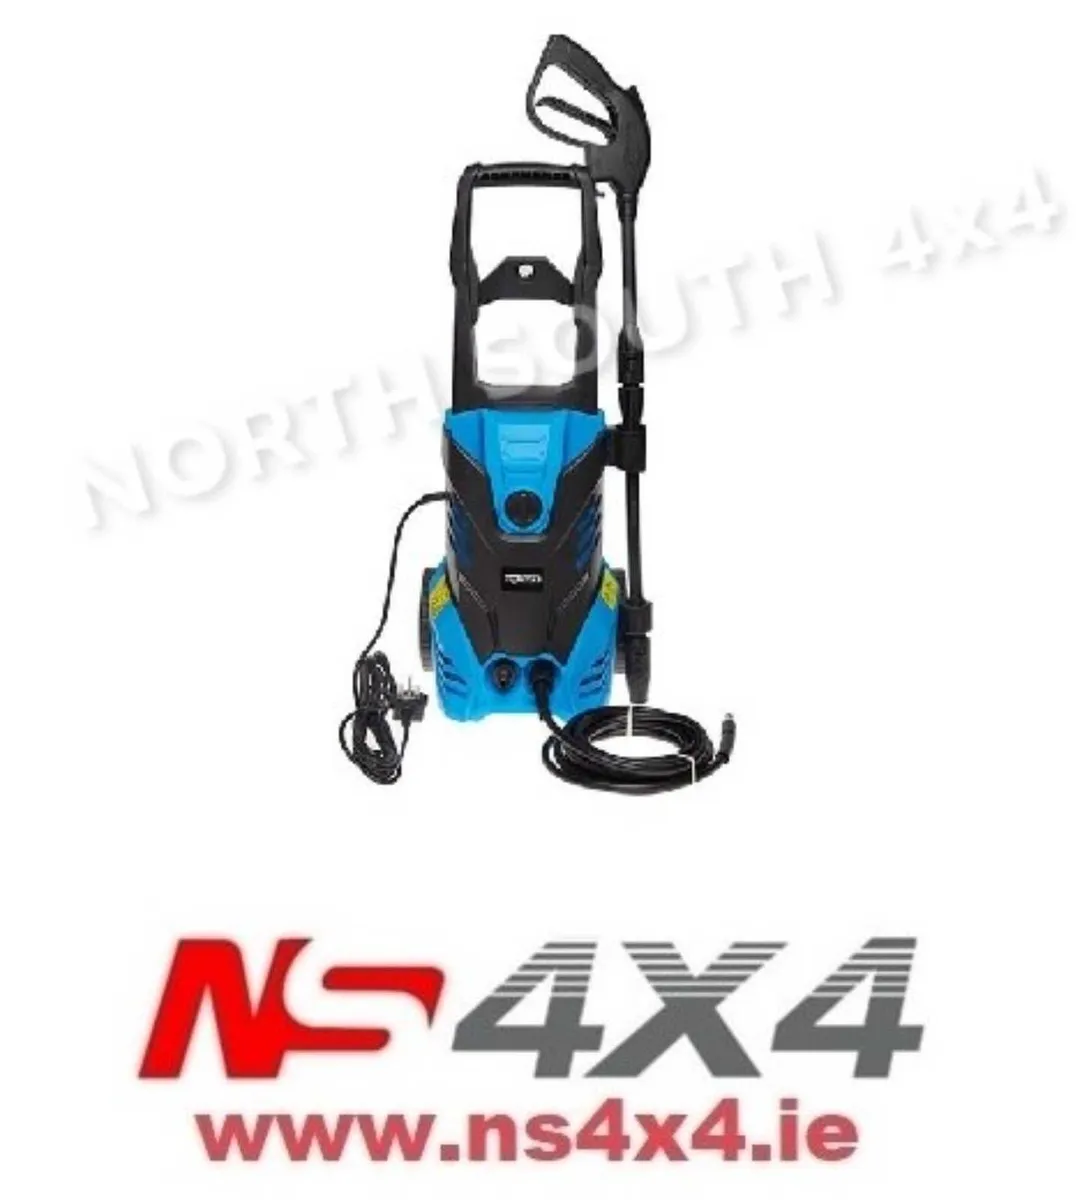 TOP TECH 1800W PRESSURE WASHER WITH INTERNAL DETER